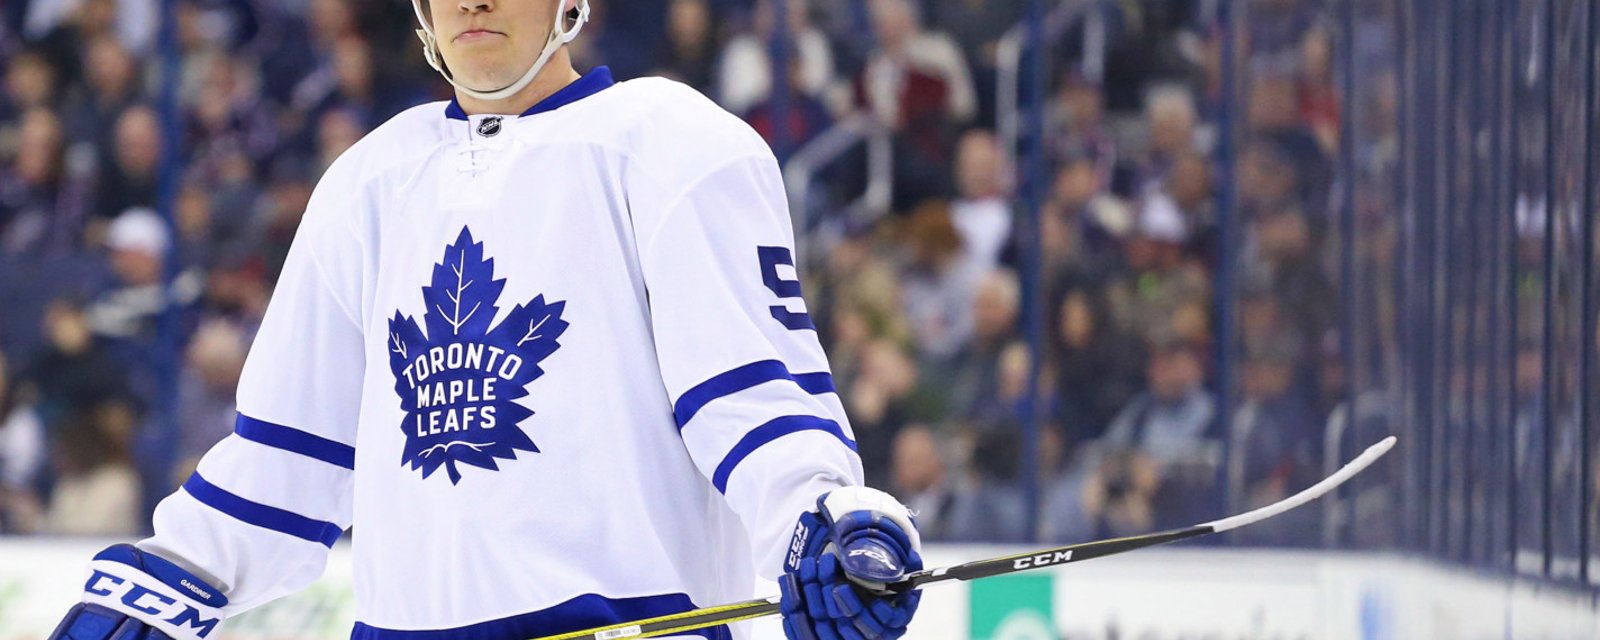 Jake Gardiner refuses to meet with media after Game 7 